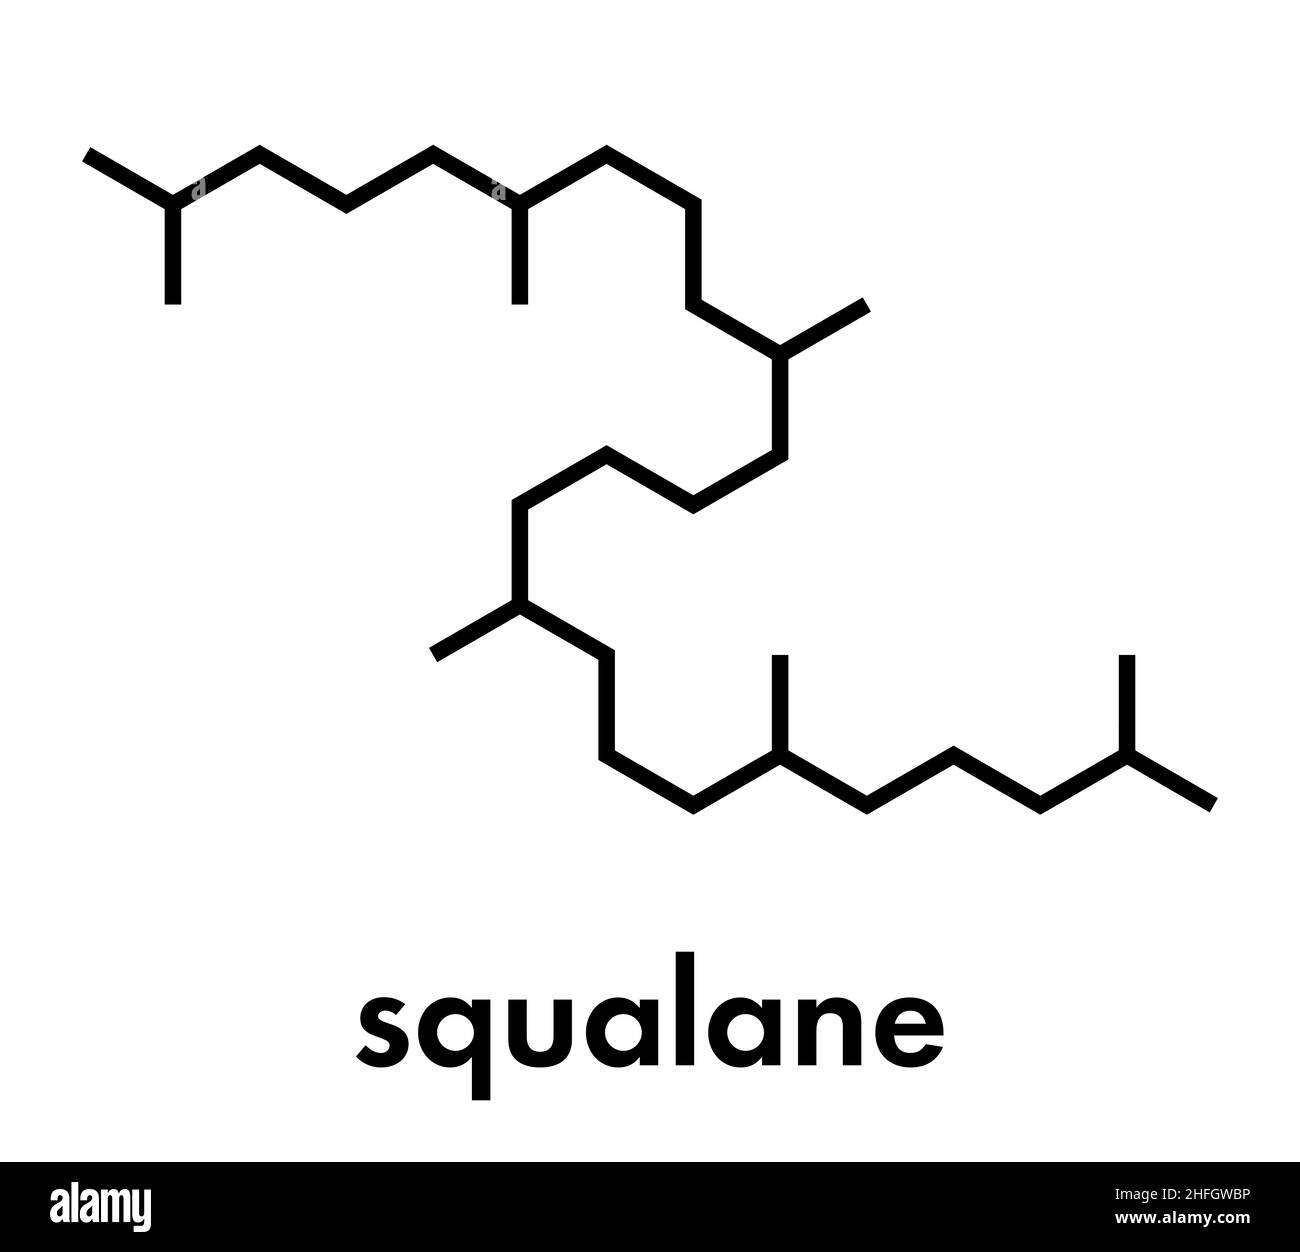 Squalane molecule. Saturated compound, derived from squalene. Used in cosmetics as emollient and moisturizer. Skeletal formula. Stock Vector